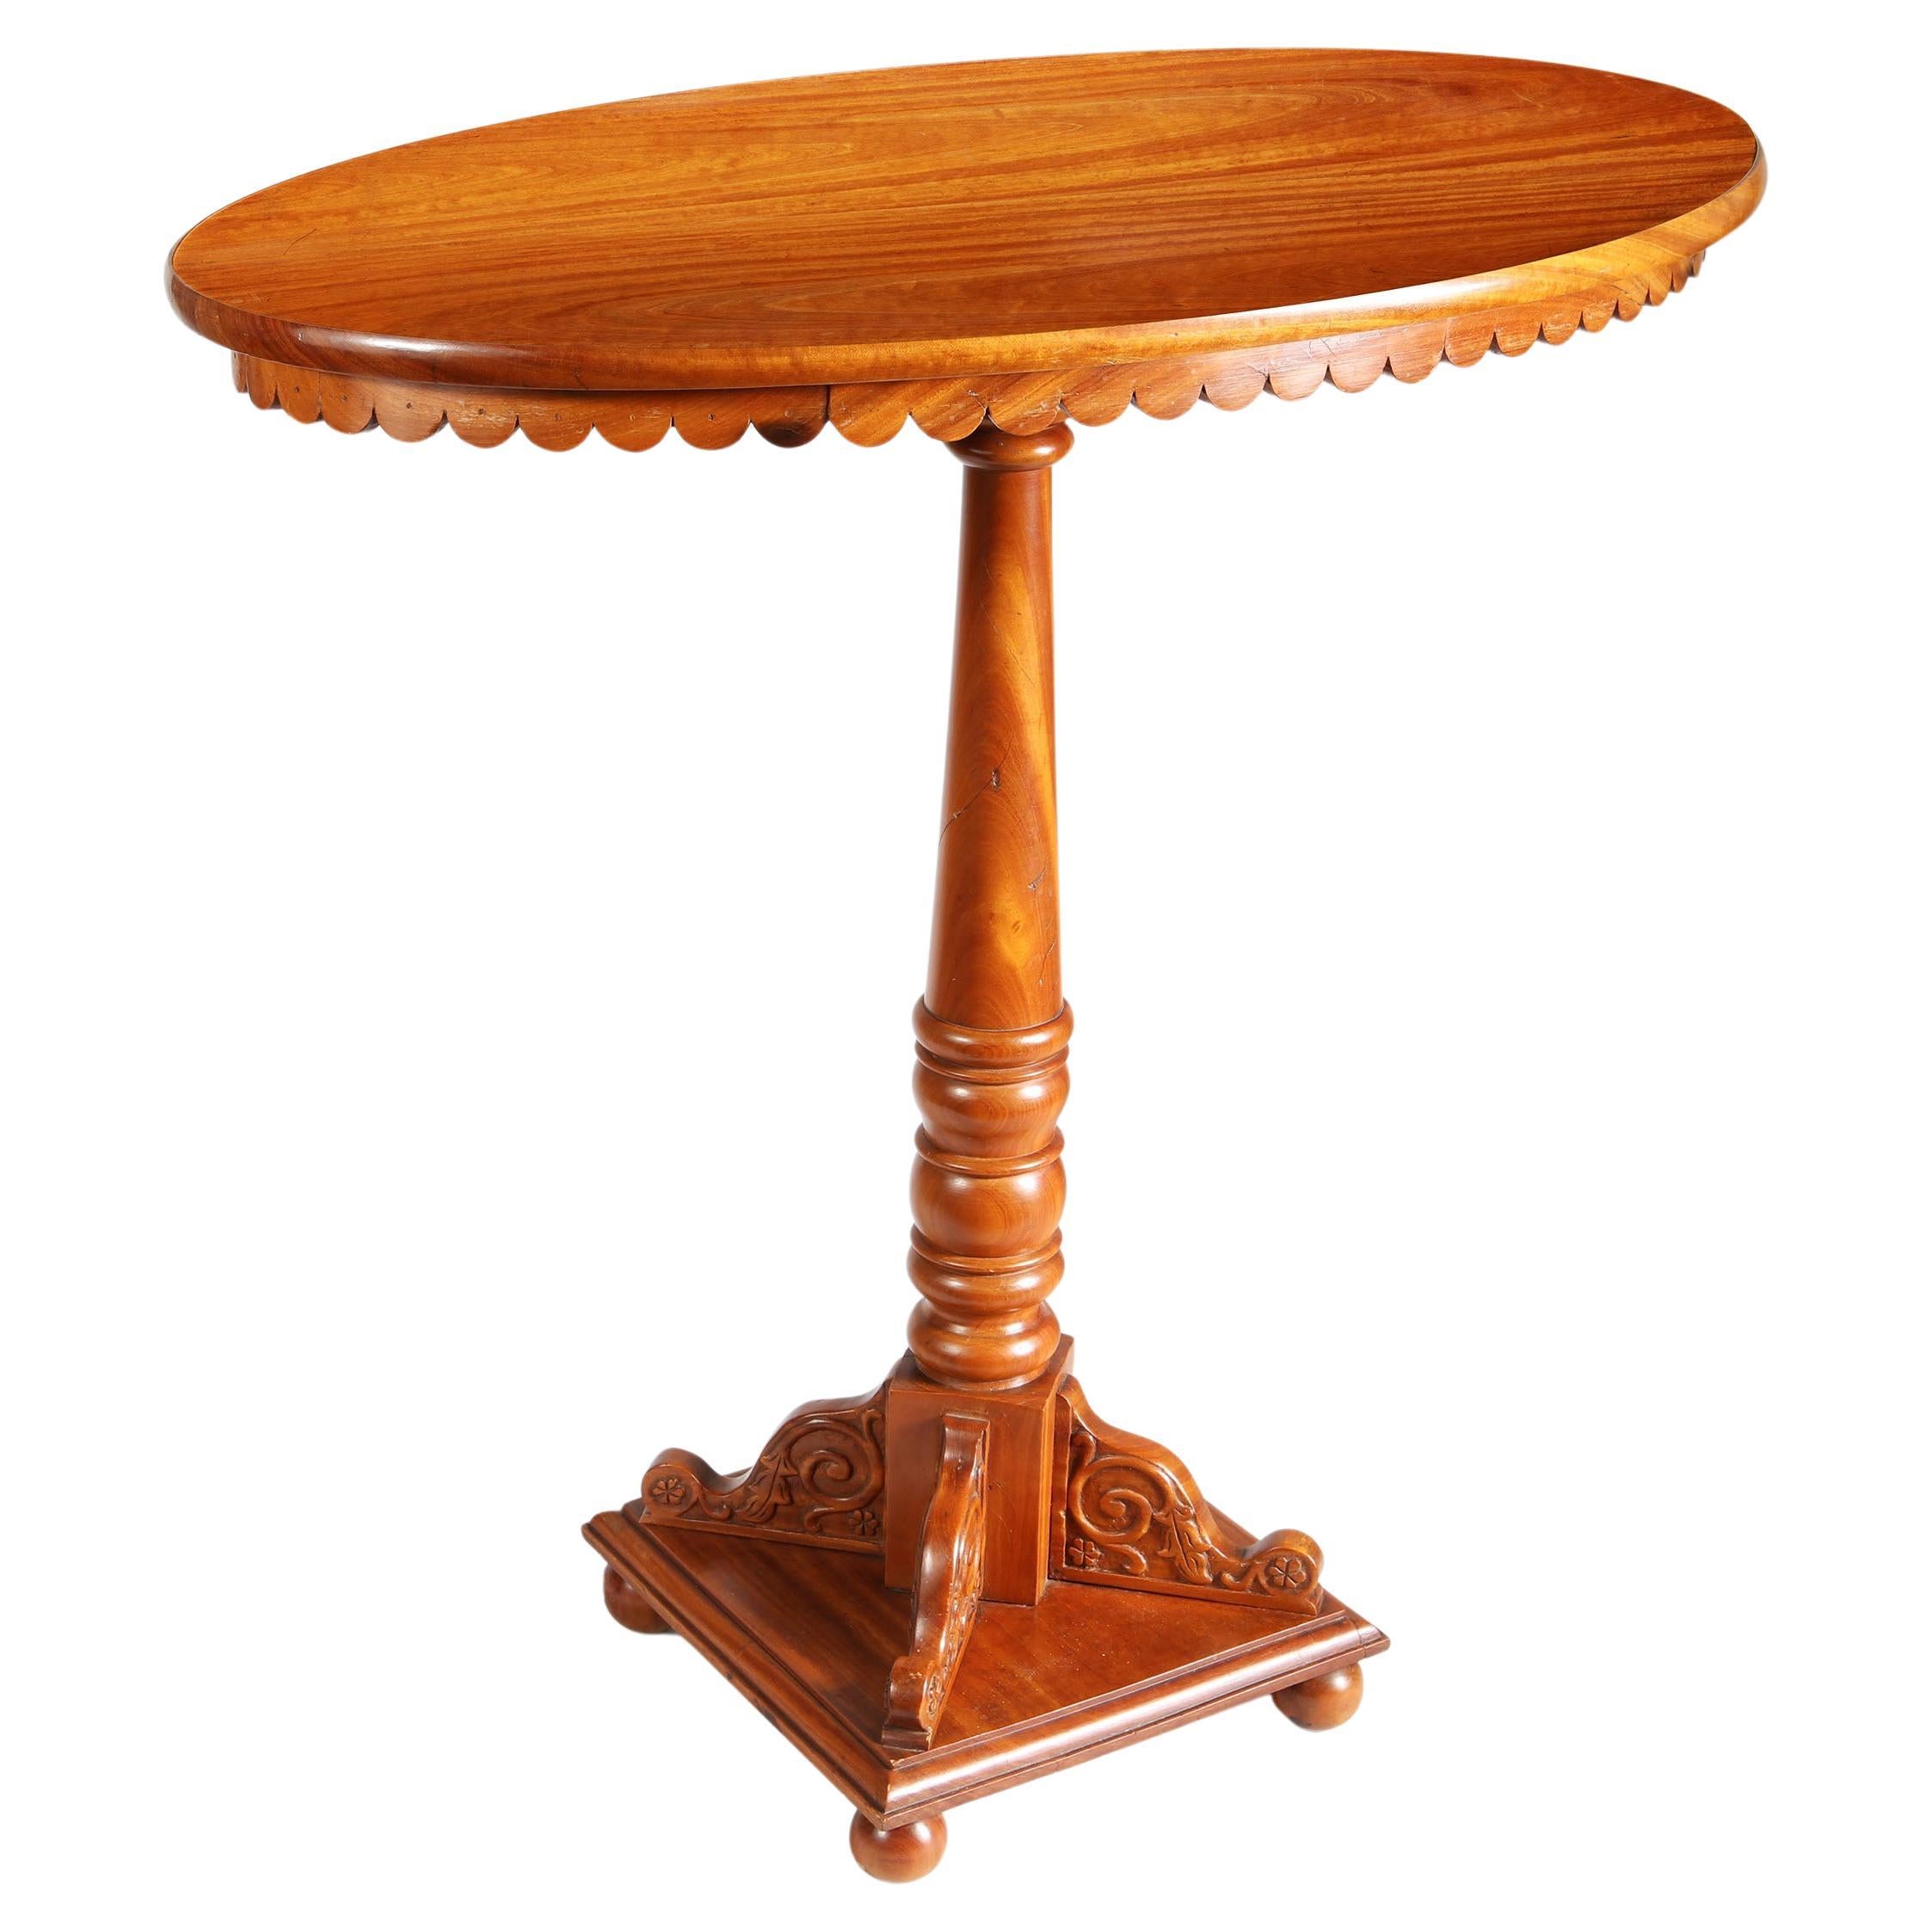 An Early 19th Century Oval Sinhalese Satinwood Table For Sale